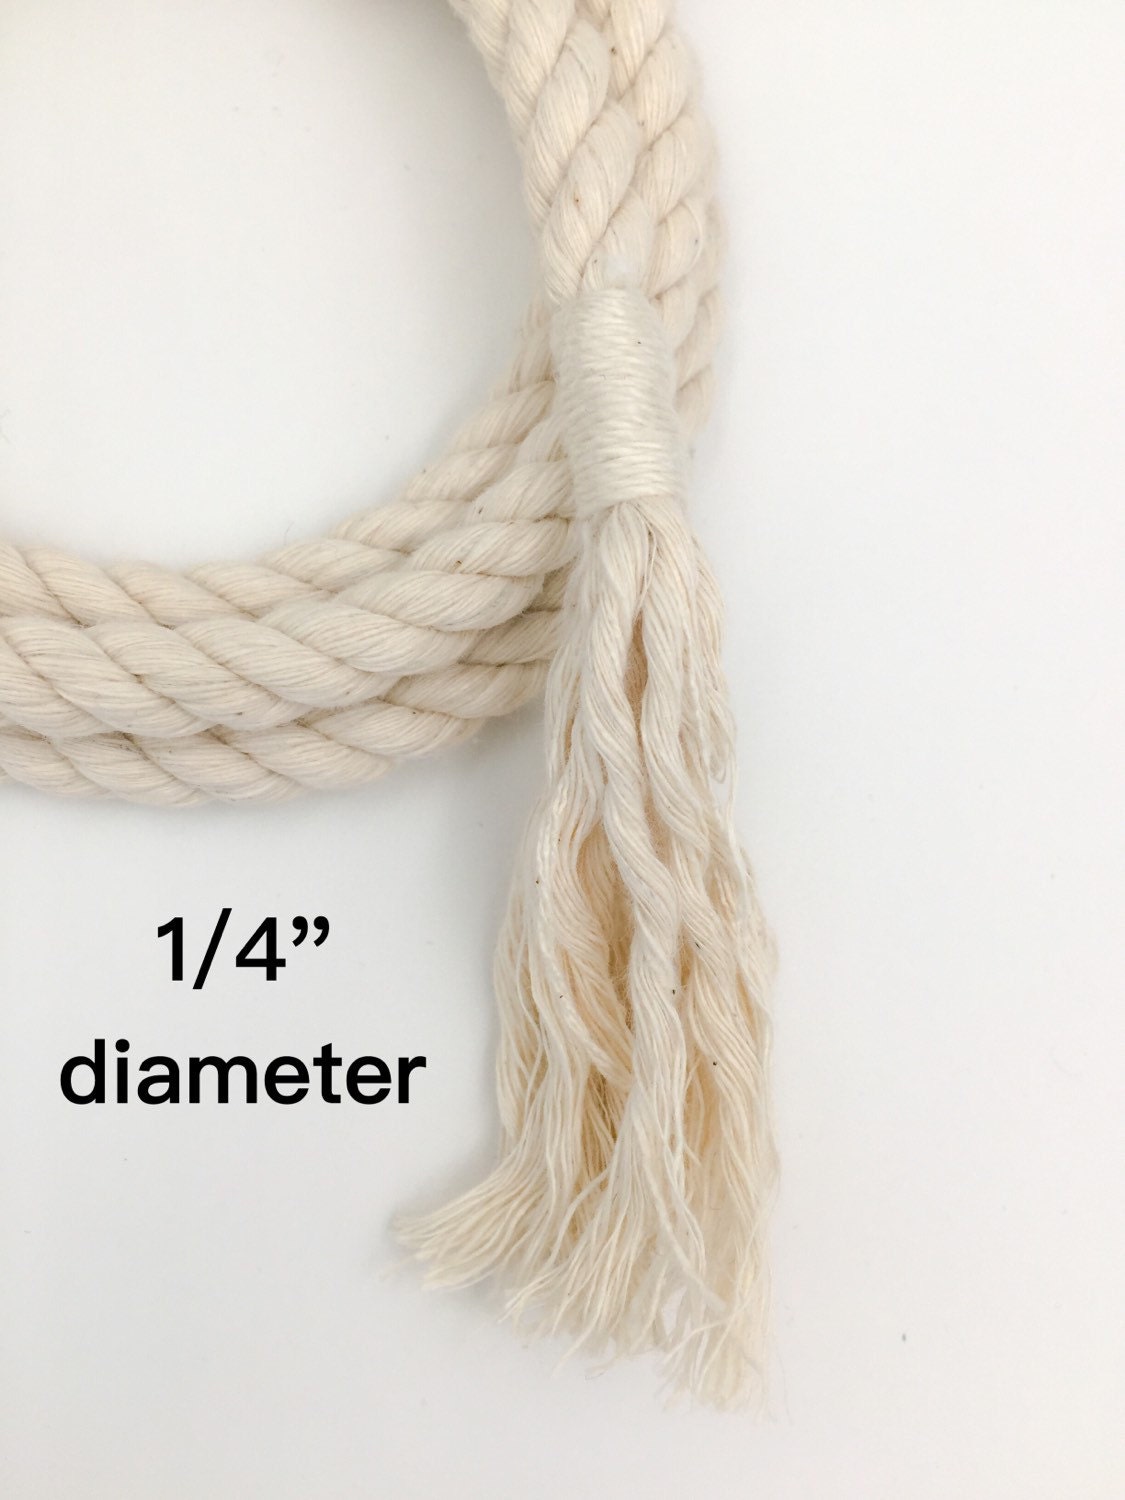 Nautical Rope Belt with Whipping Knot Ends - 1/2 Diameter